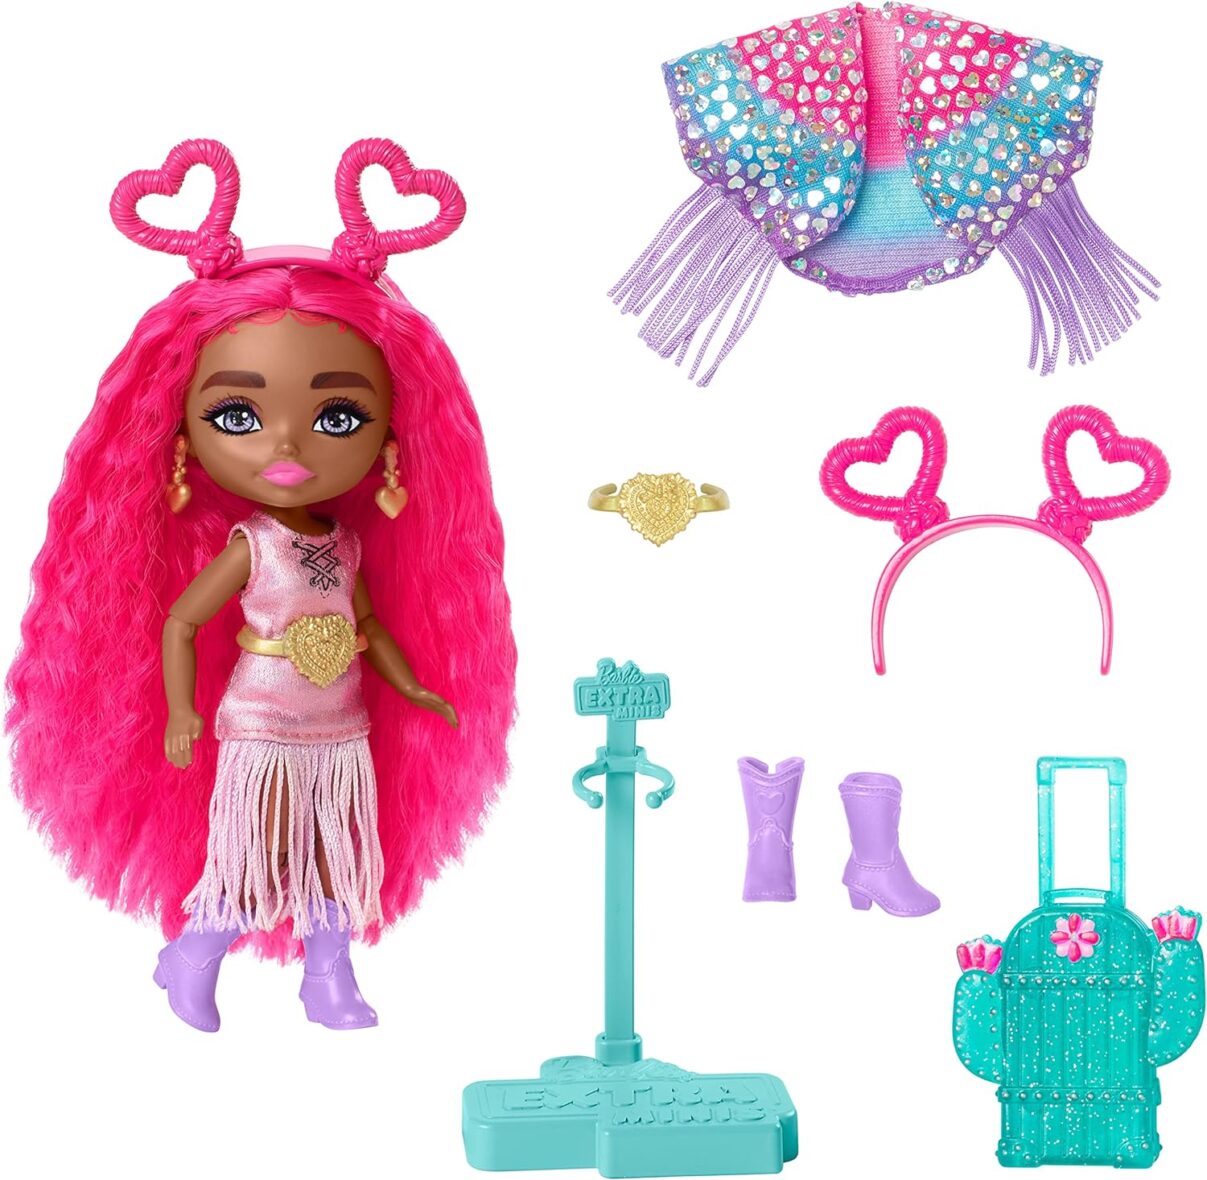 Barbie Extra Fly Minis Travel Doll, Desert Festival Look with Magenta Hair in Fringe Jacket & Fringe Dress & Accessories Small